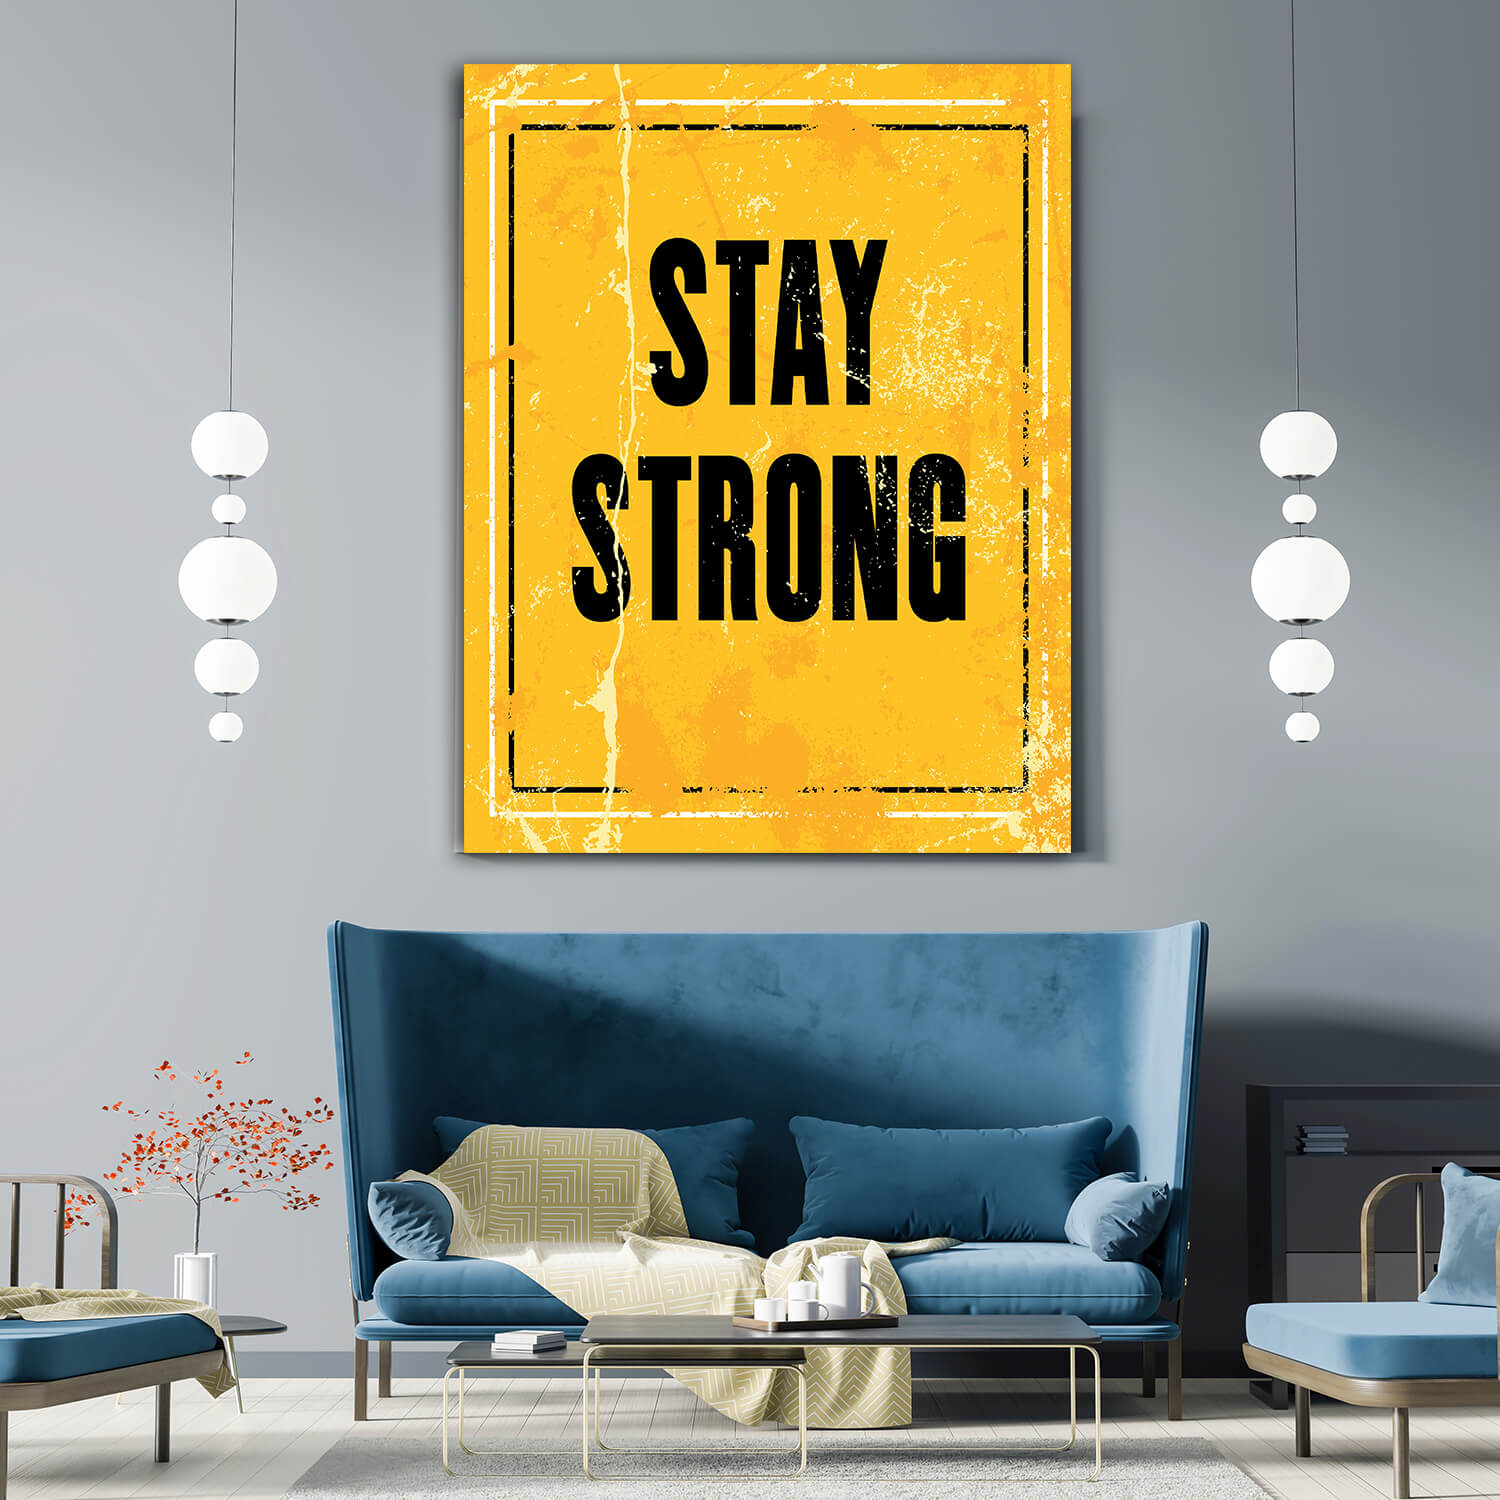 W1_0027_M&P_0004_ML_0026_32765774_Motivation Quote STAY STRONG AOA10825